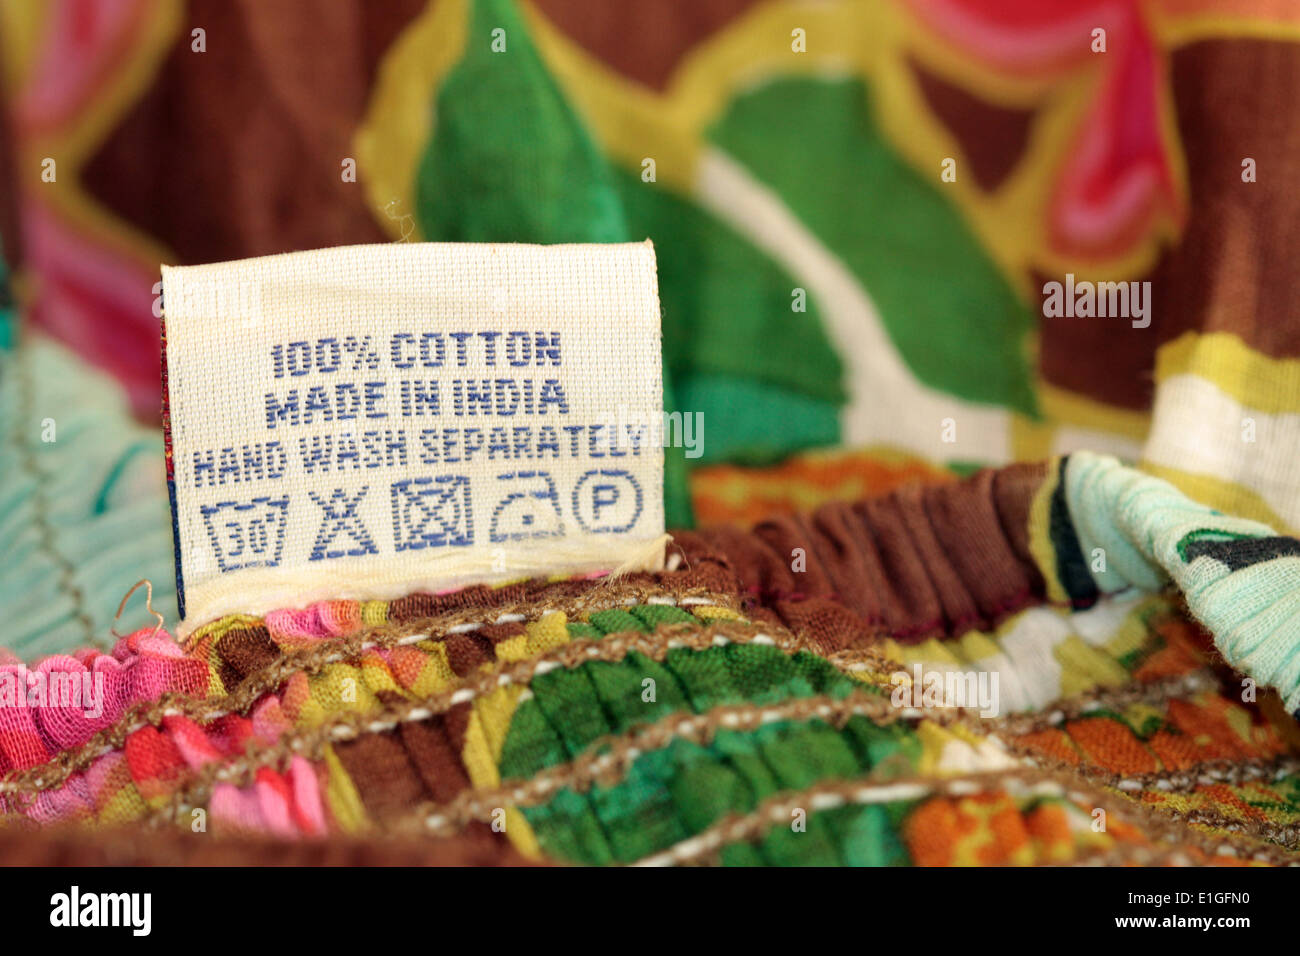 Clothes marker - Made in India - May 2014. Stock Photo